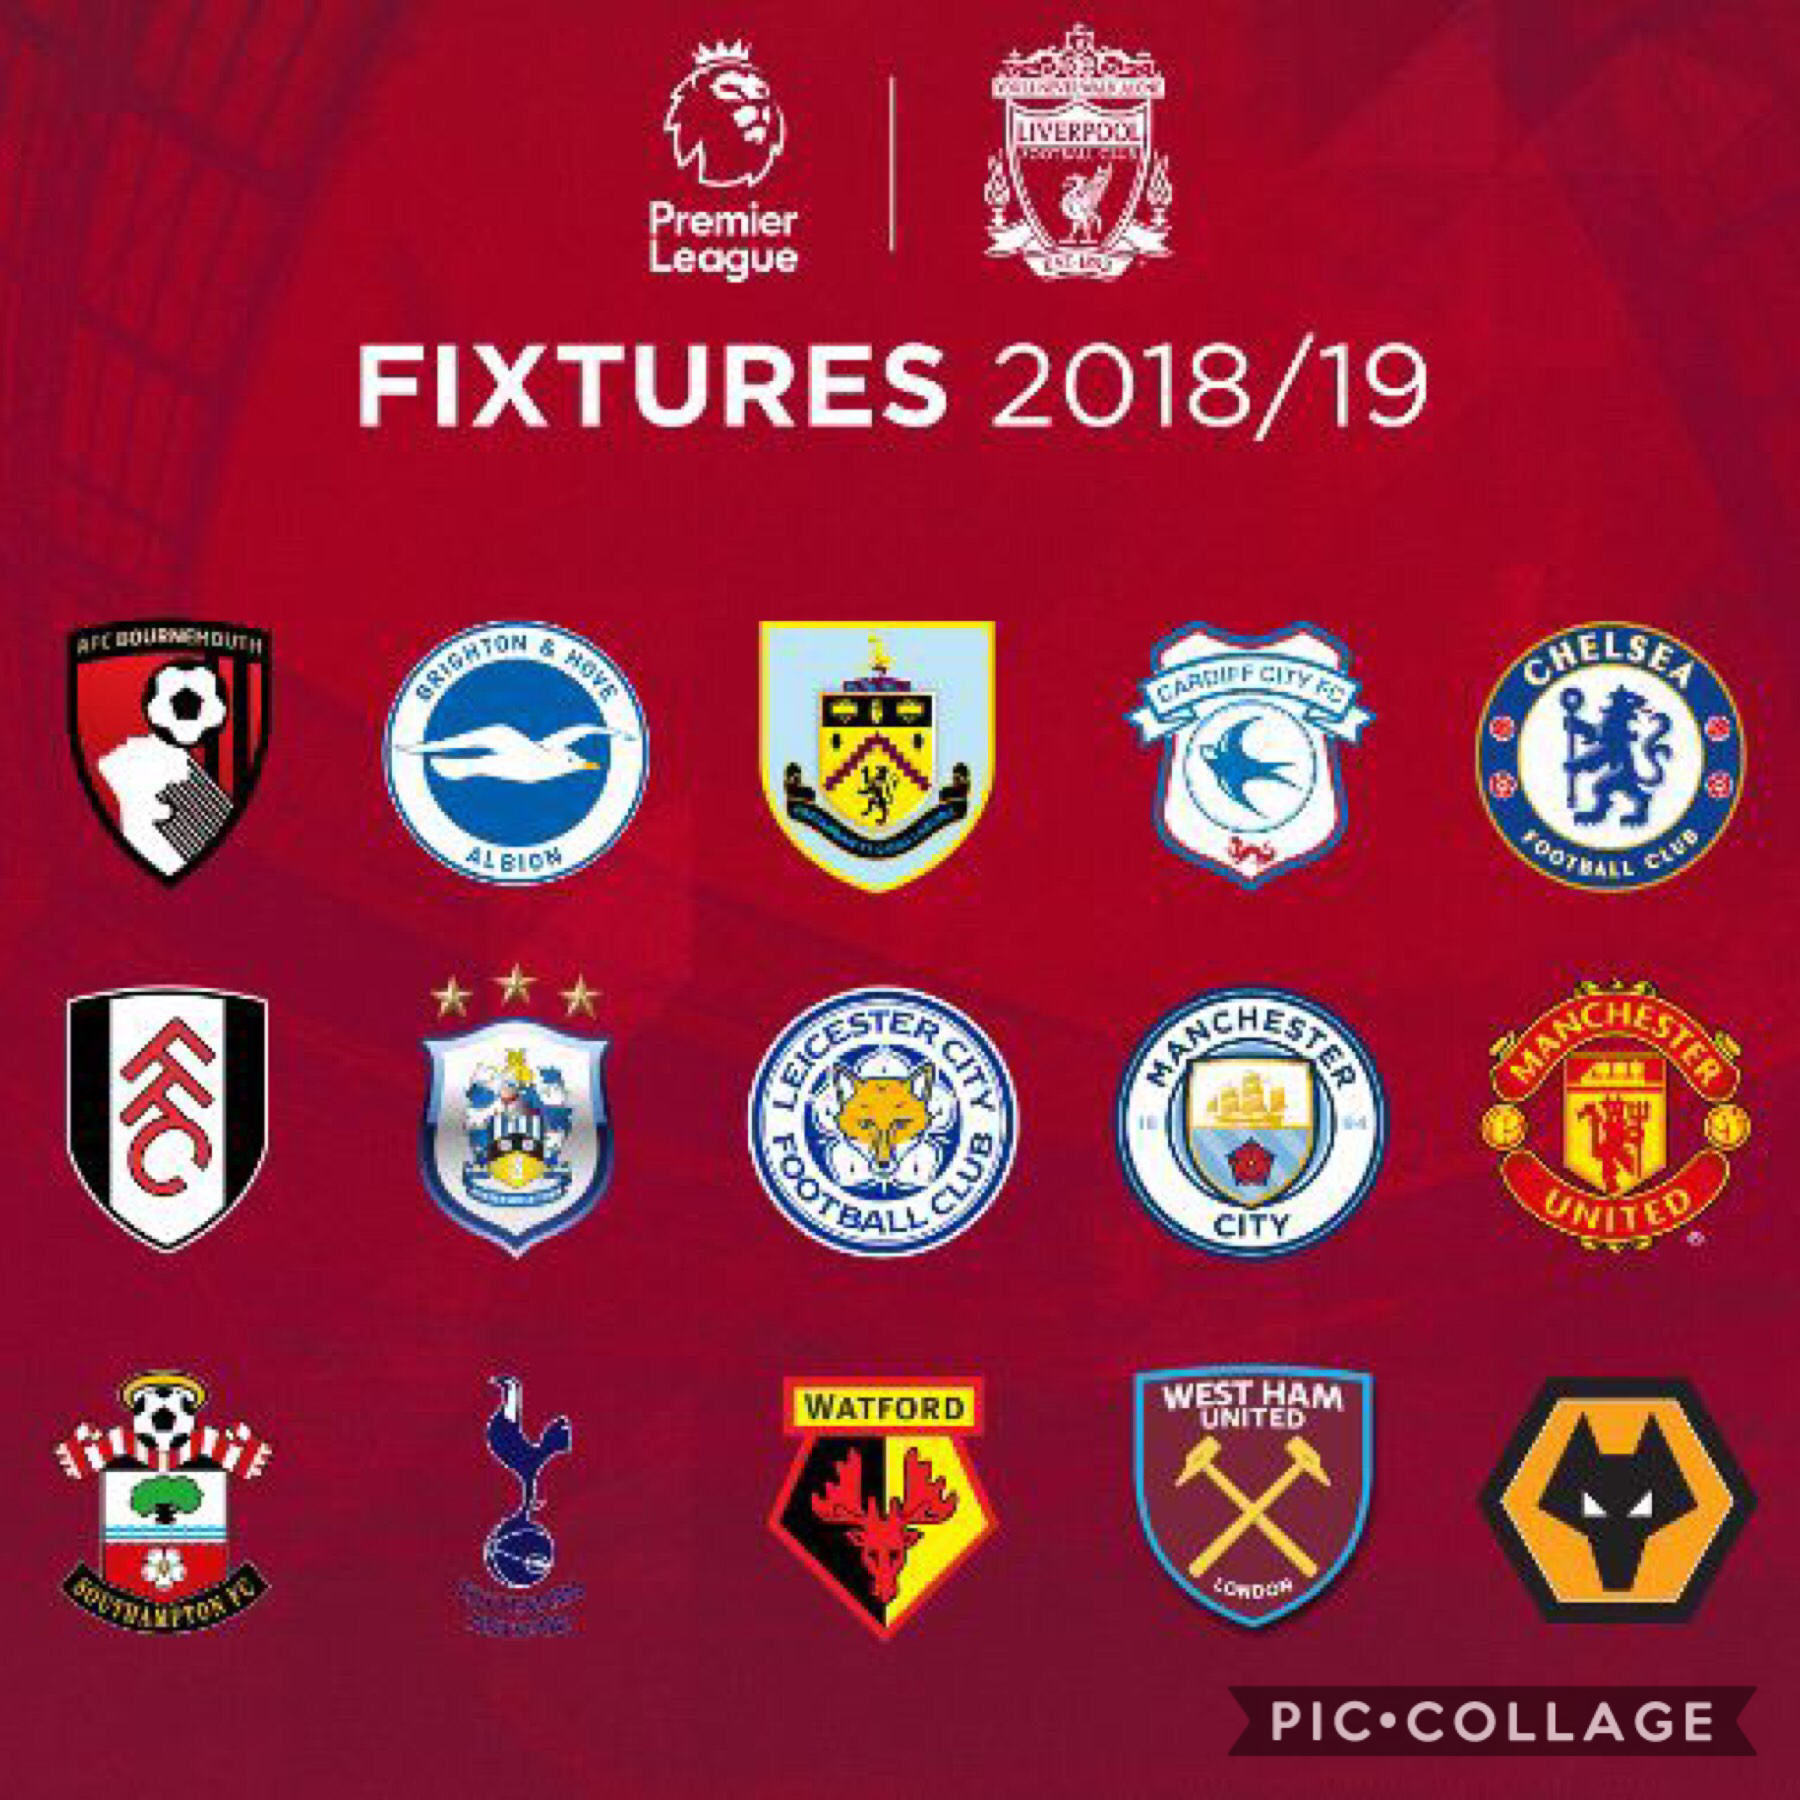 Which club team do you support?